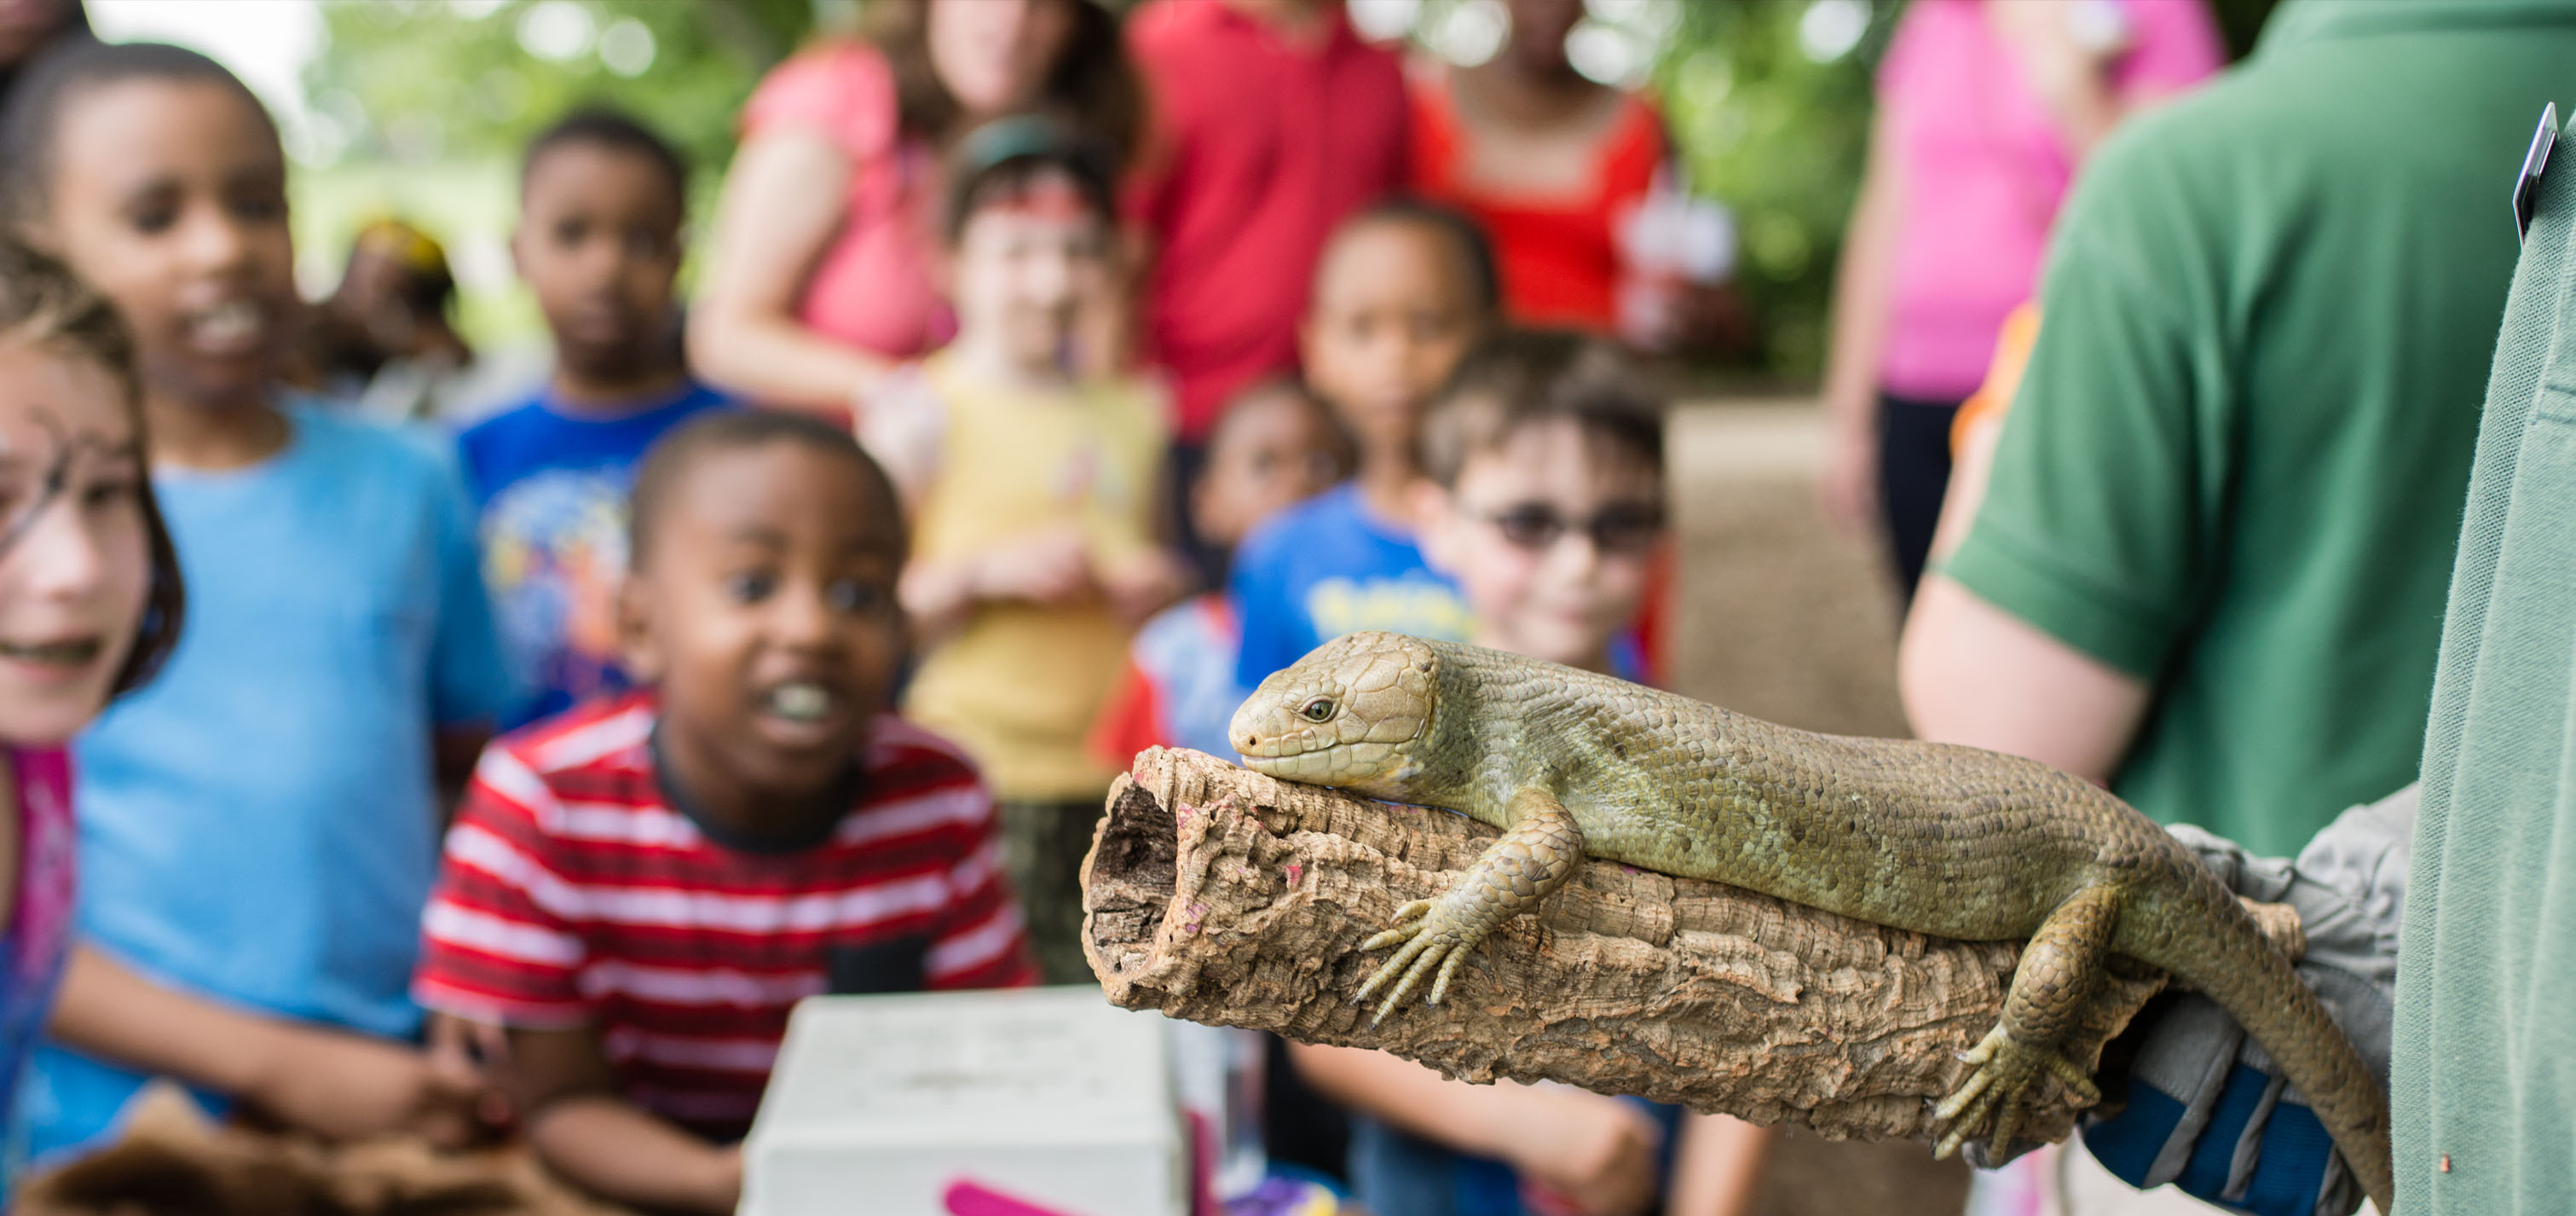 Brandywine Zoo conducting outreach programs at Alapocas Run State Park